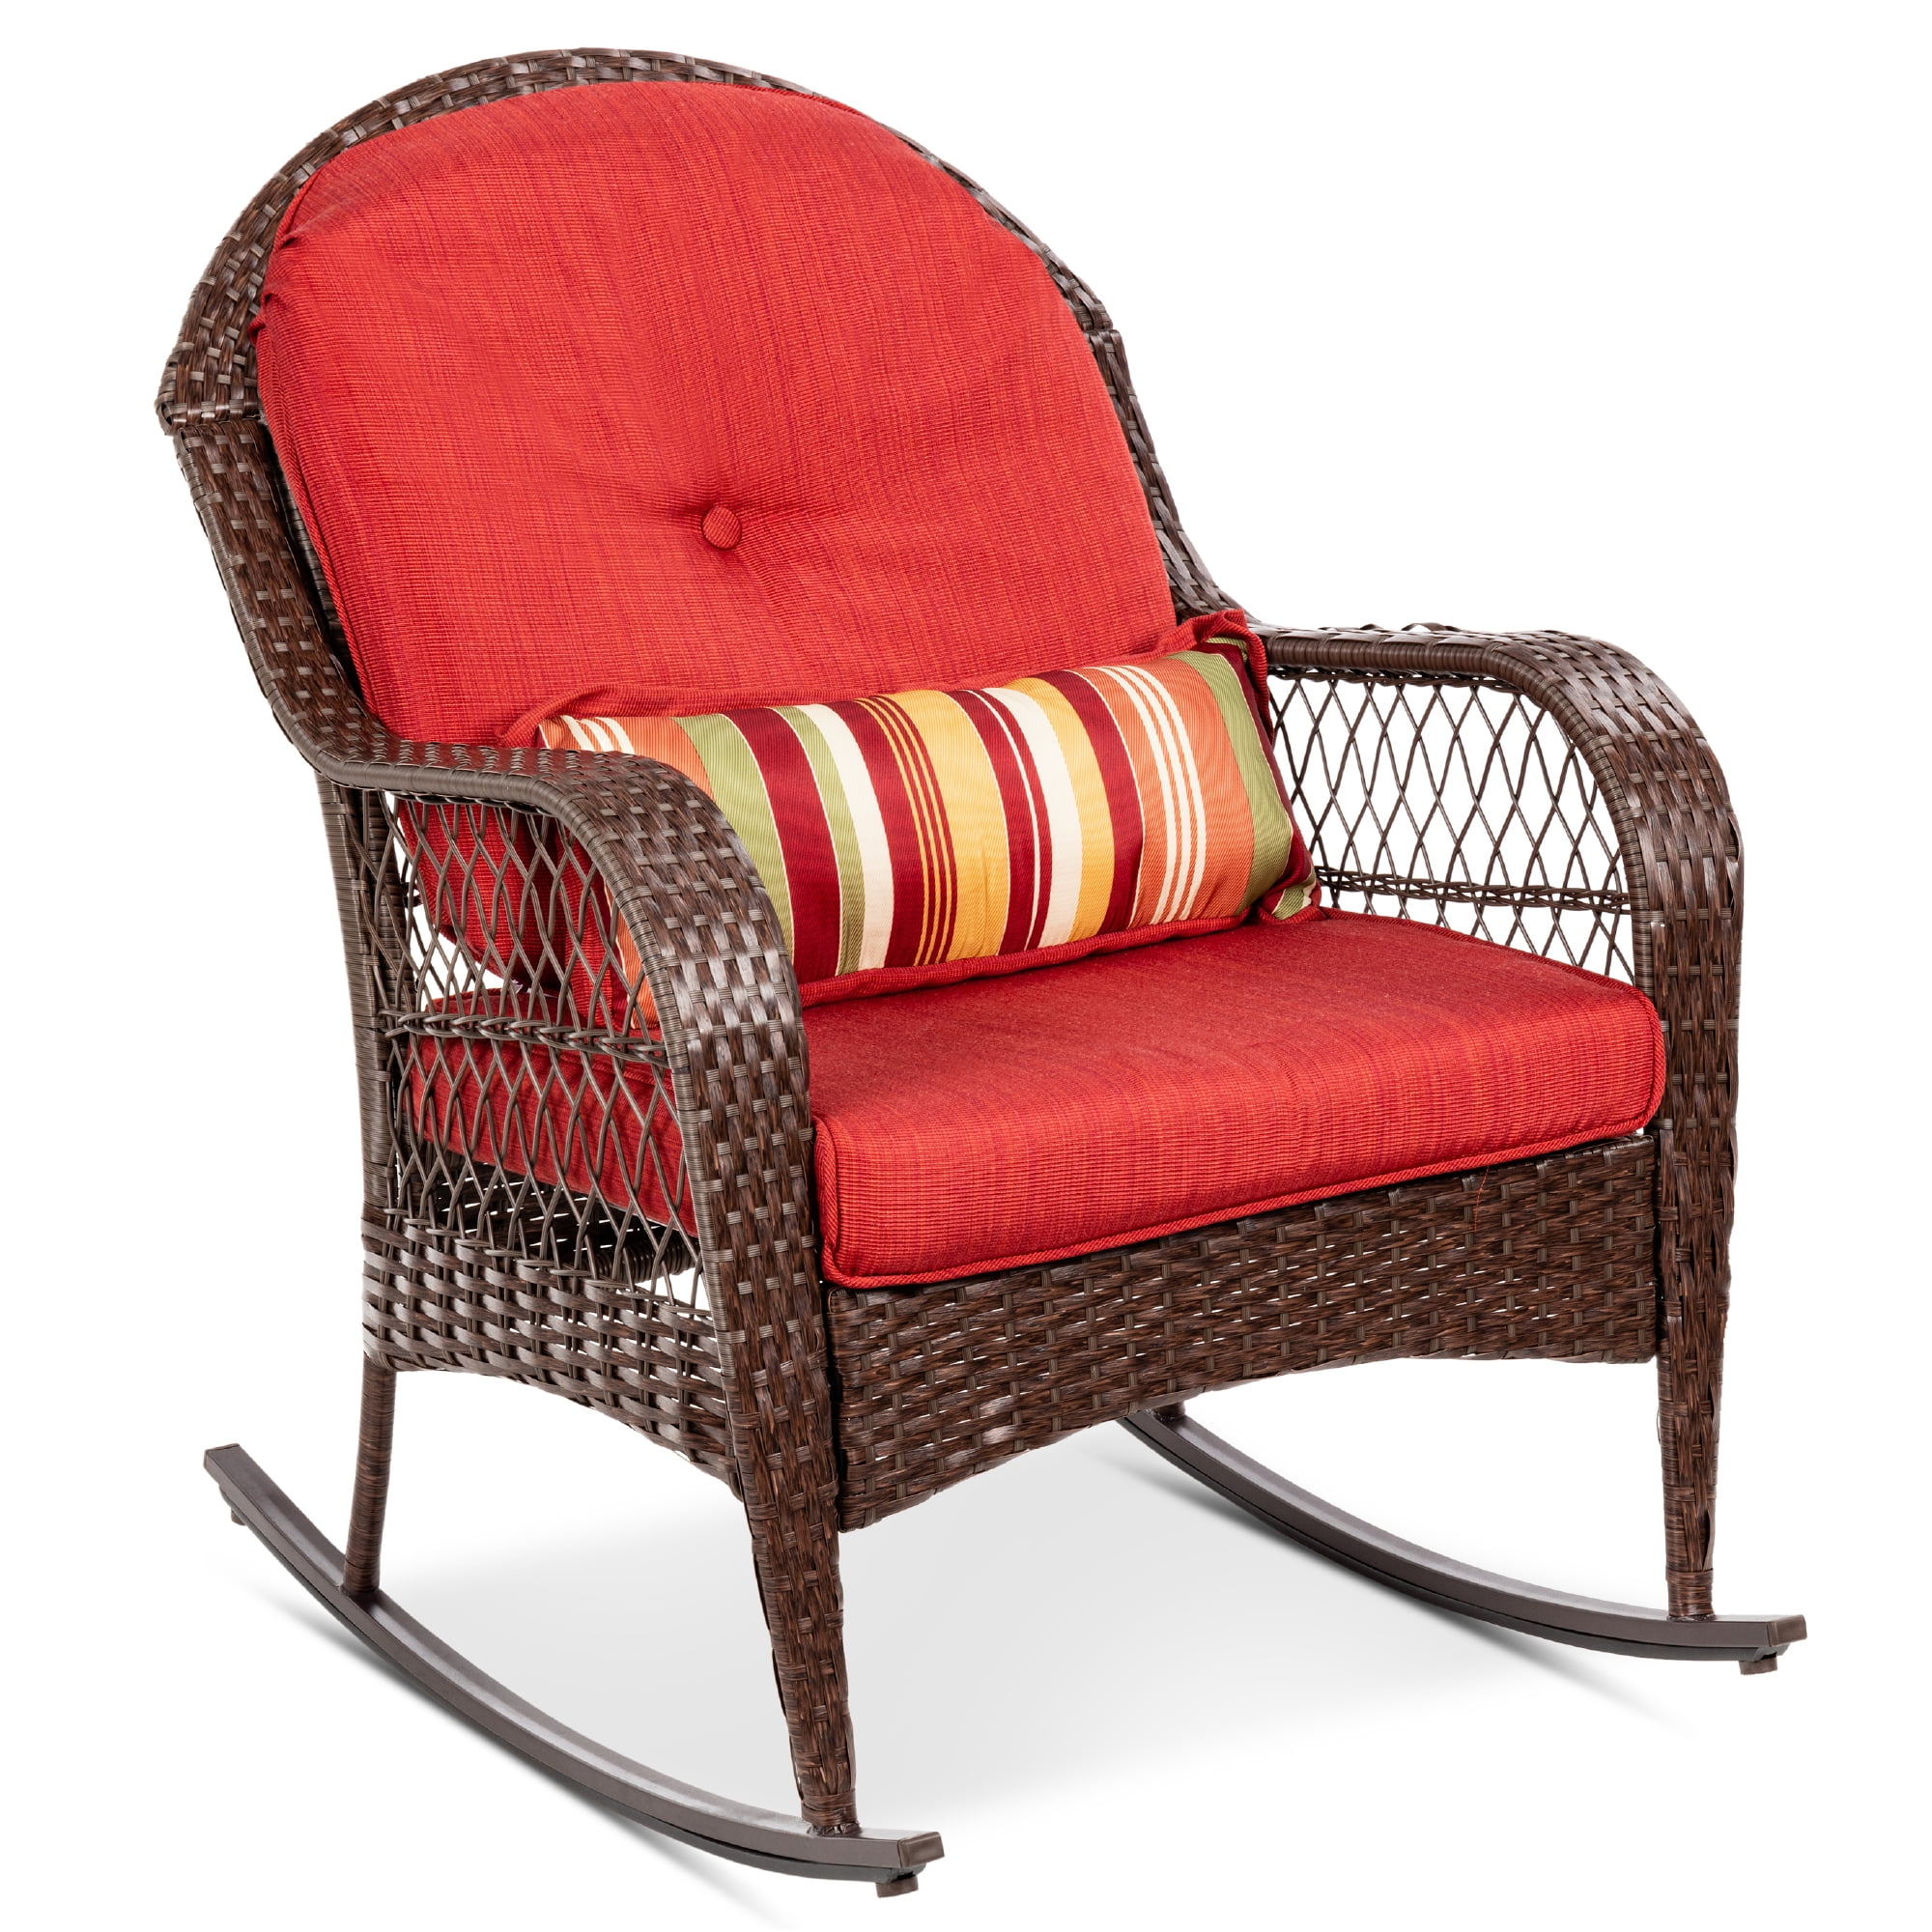 Patio Furniture & Accessories Classic Traditional Brown Resin Wicker